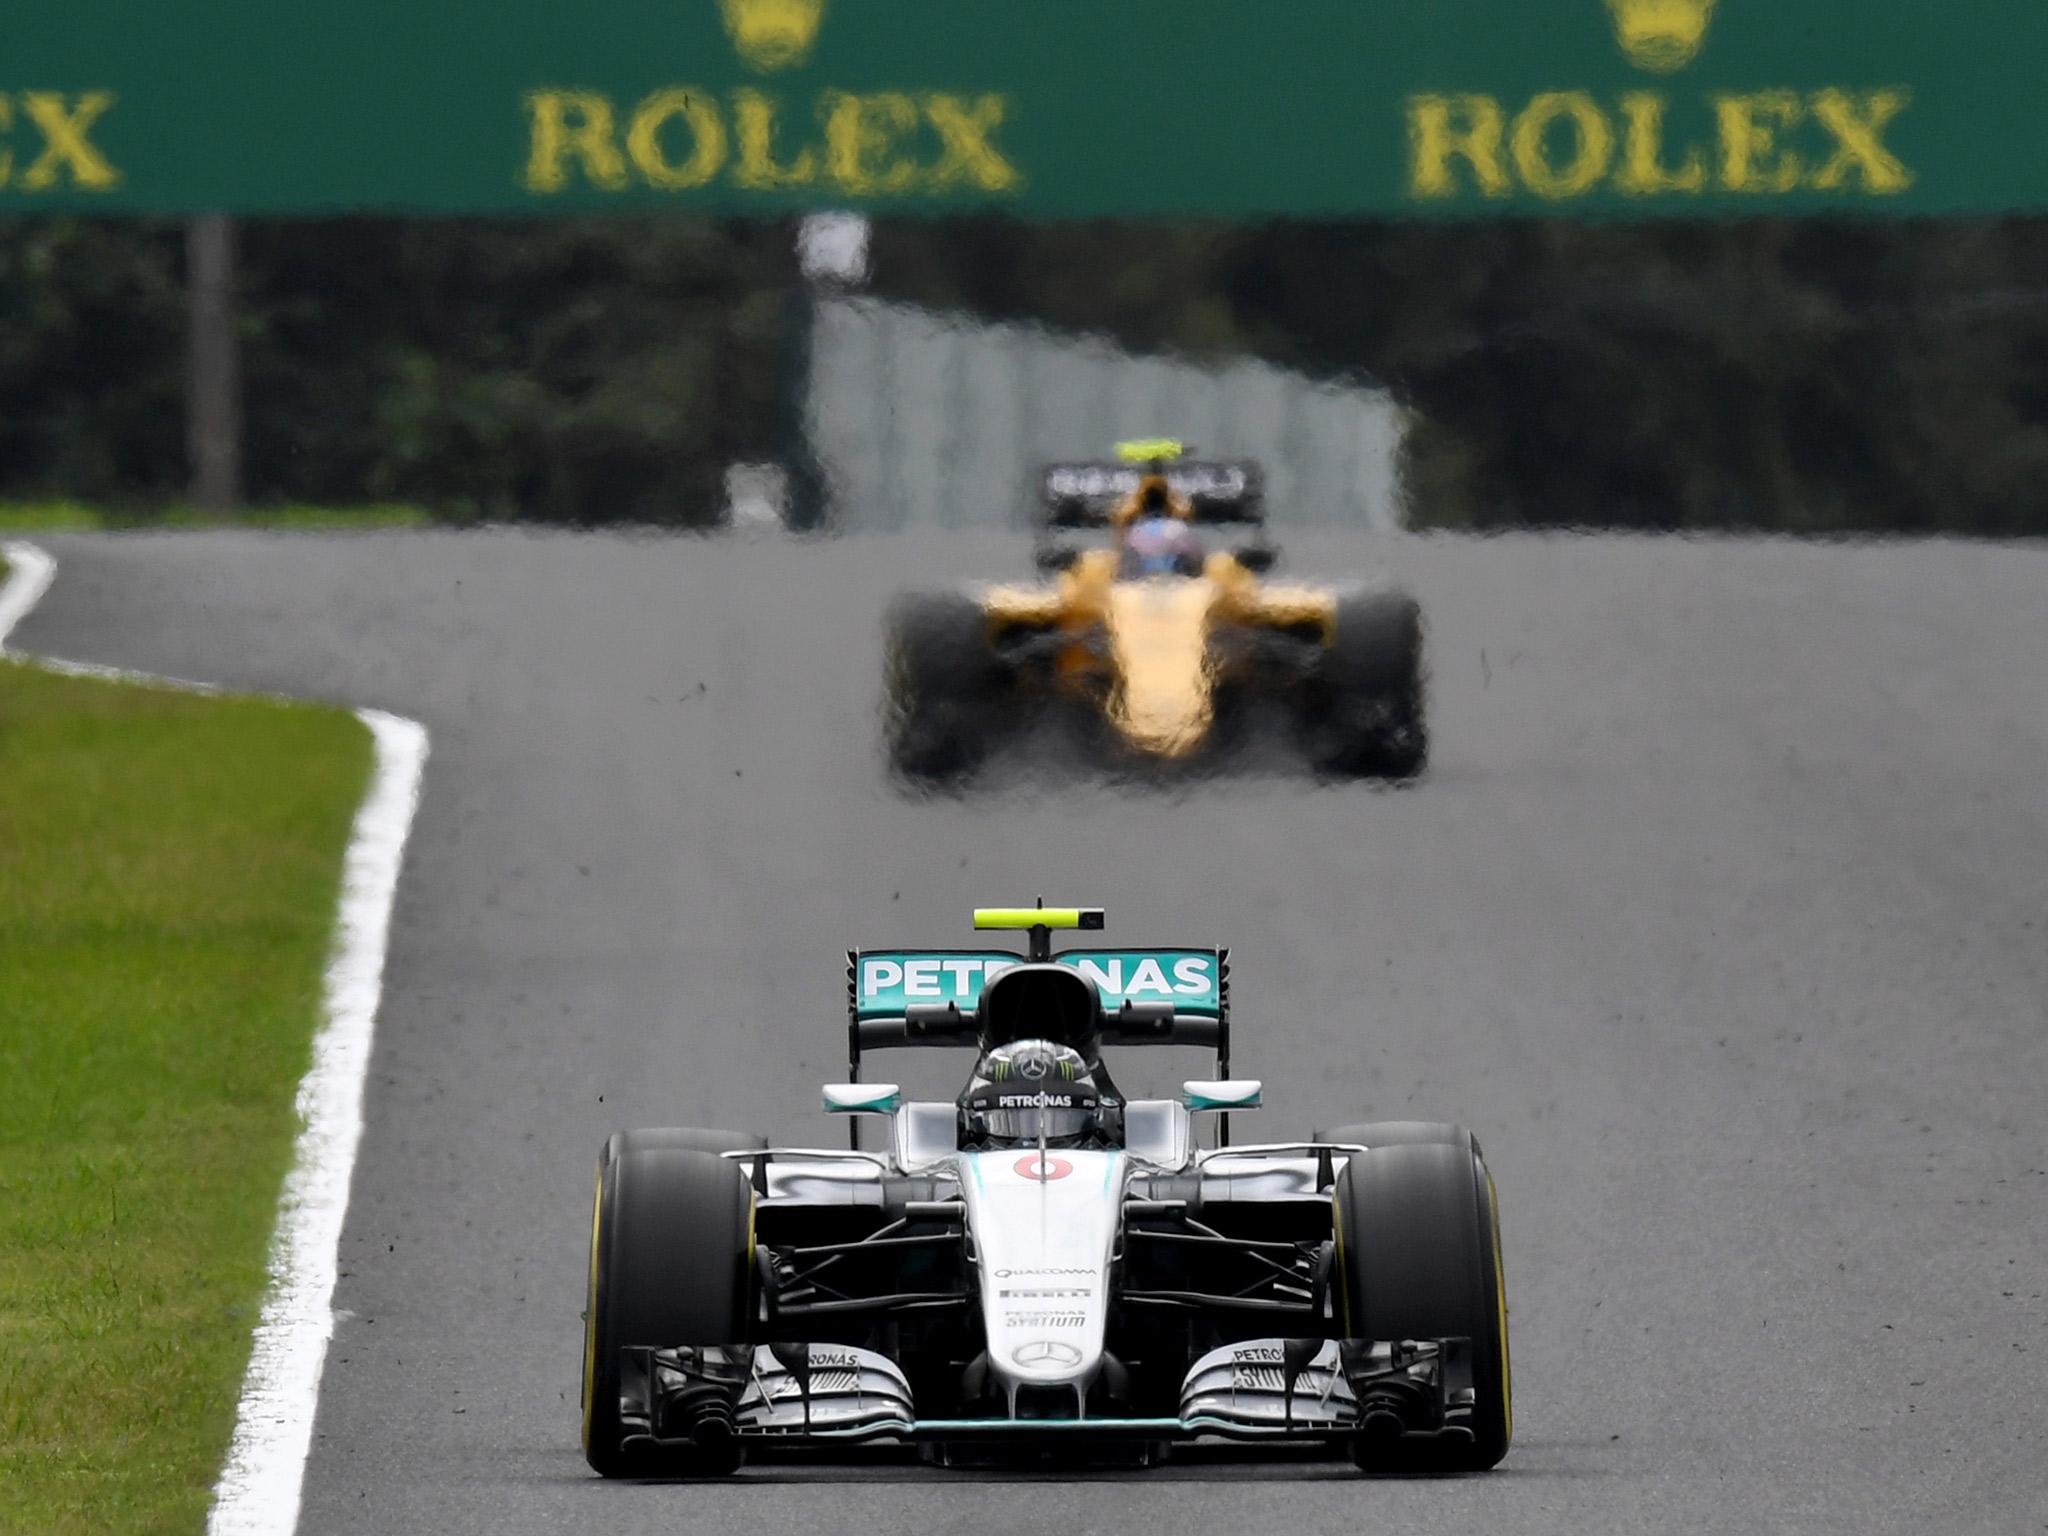 Nico Rosberg topped both practice sessions at Suzuka